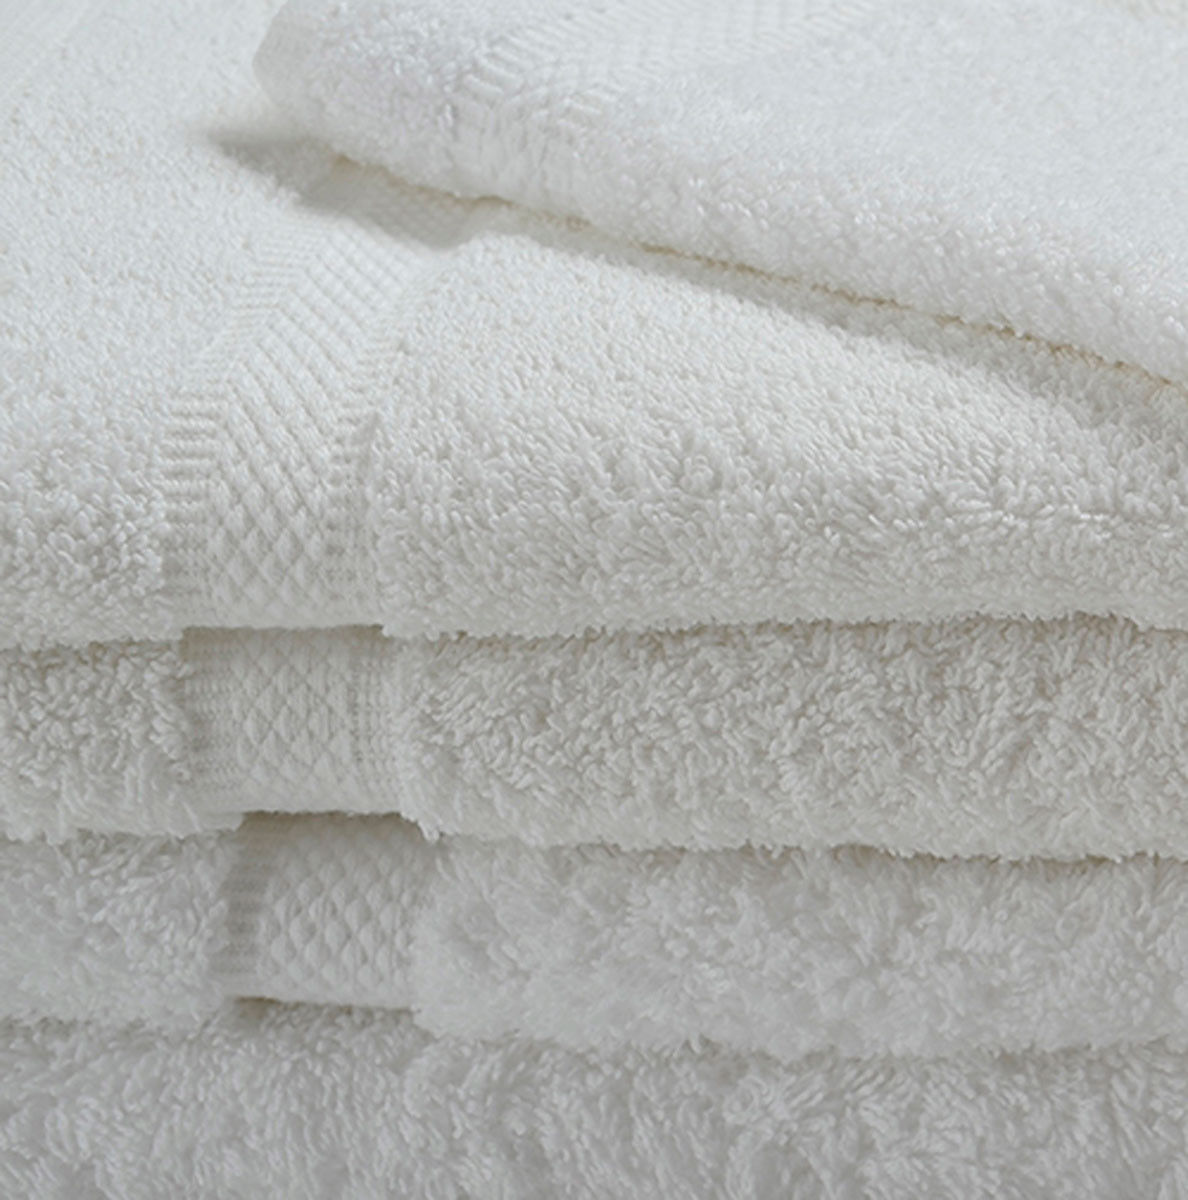 What features do the Oxford Imperiale towels from the wholesale collection offer?